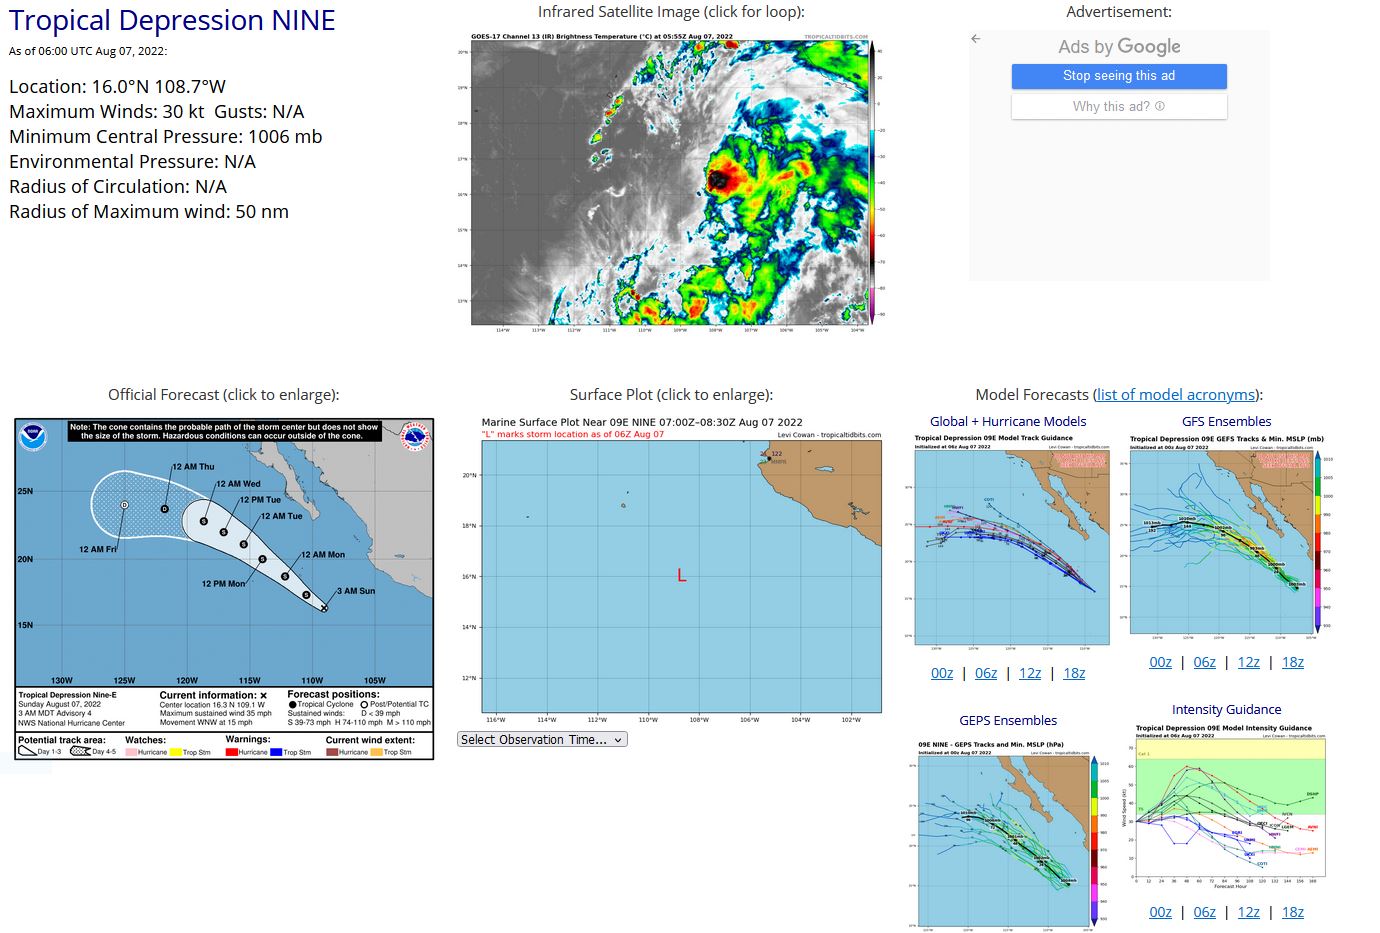 Invest 97W set to be a monsoon depression next 48h// Invest 97B close to the Indian coast//TD 09E to intensify next 48h, 07/06utc